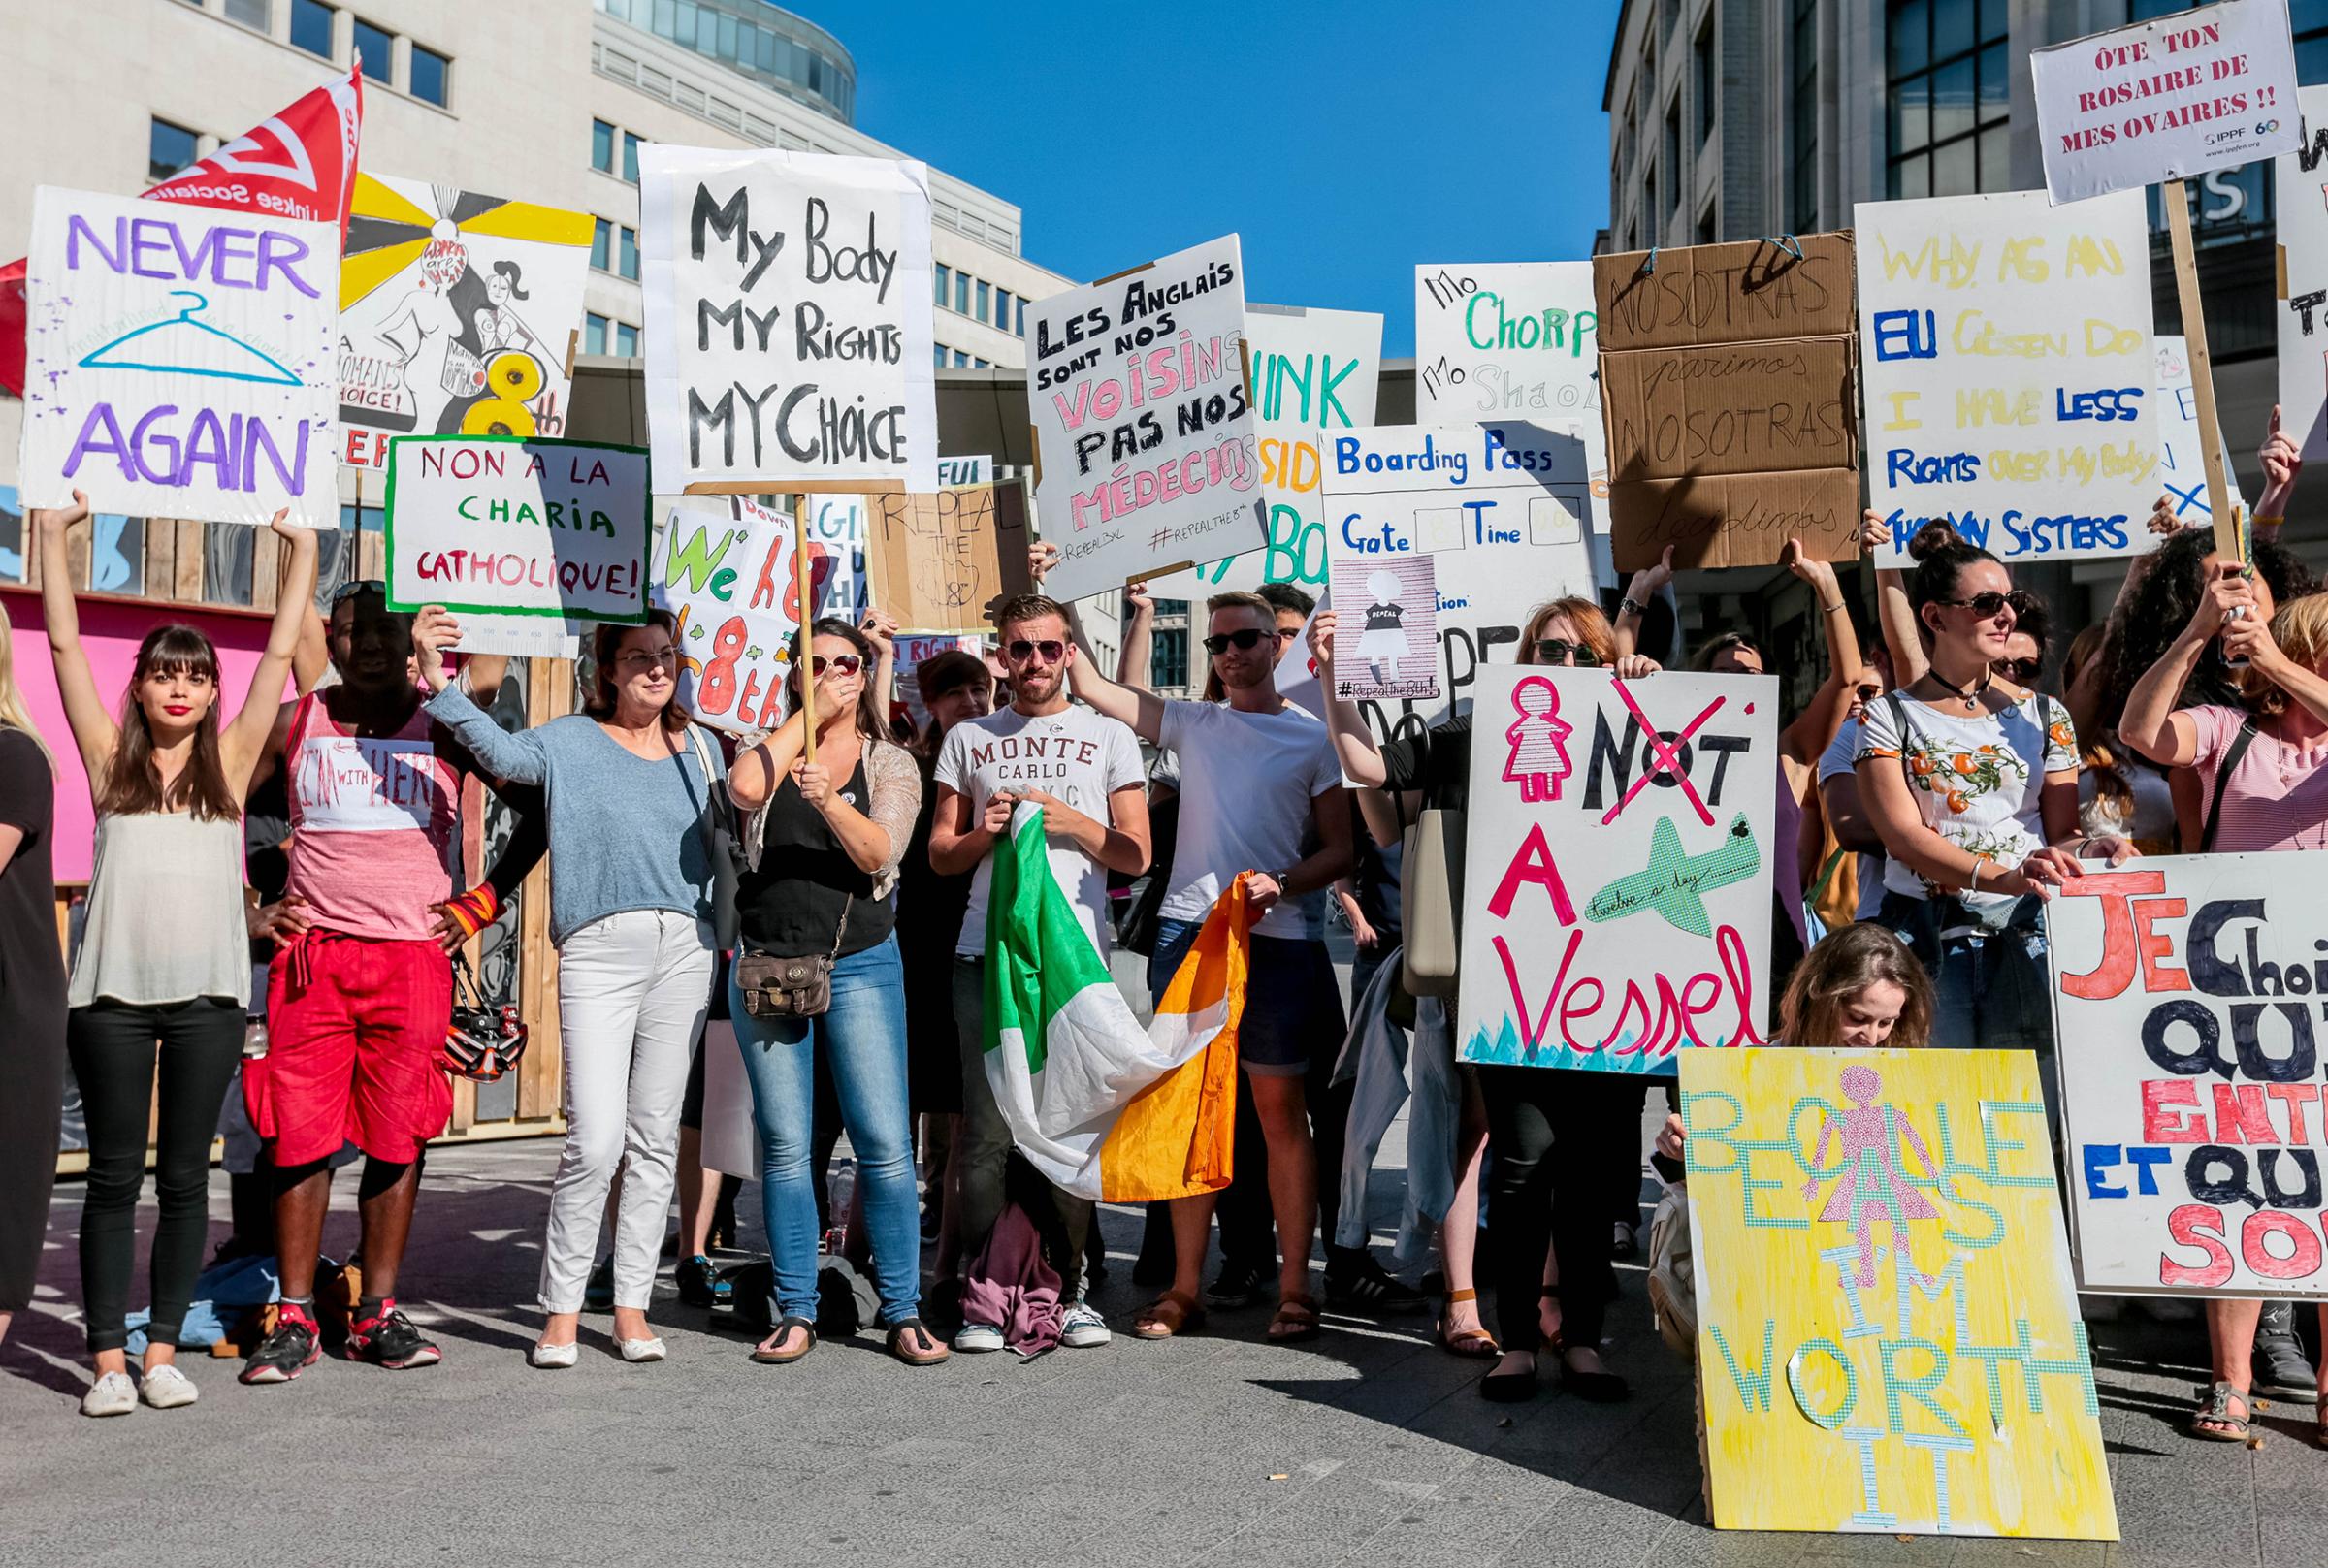 Demonstrators gather and hold banners to protest for the repeal of the Eighth Amendment to the Irish Constitution in Brussels, Belgium, on Sept. 24, 2016. The Eighth Amendment to the Constitution is the law against abortion in Ireland.